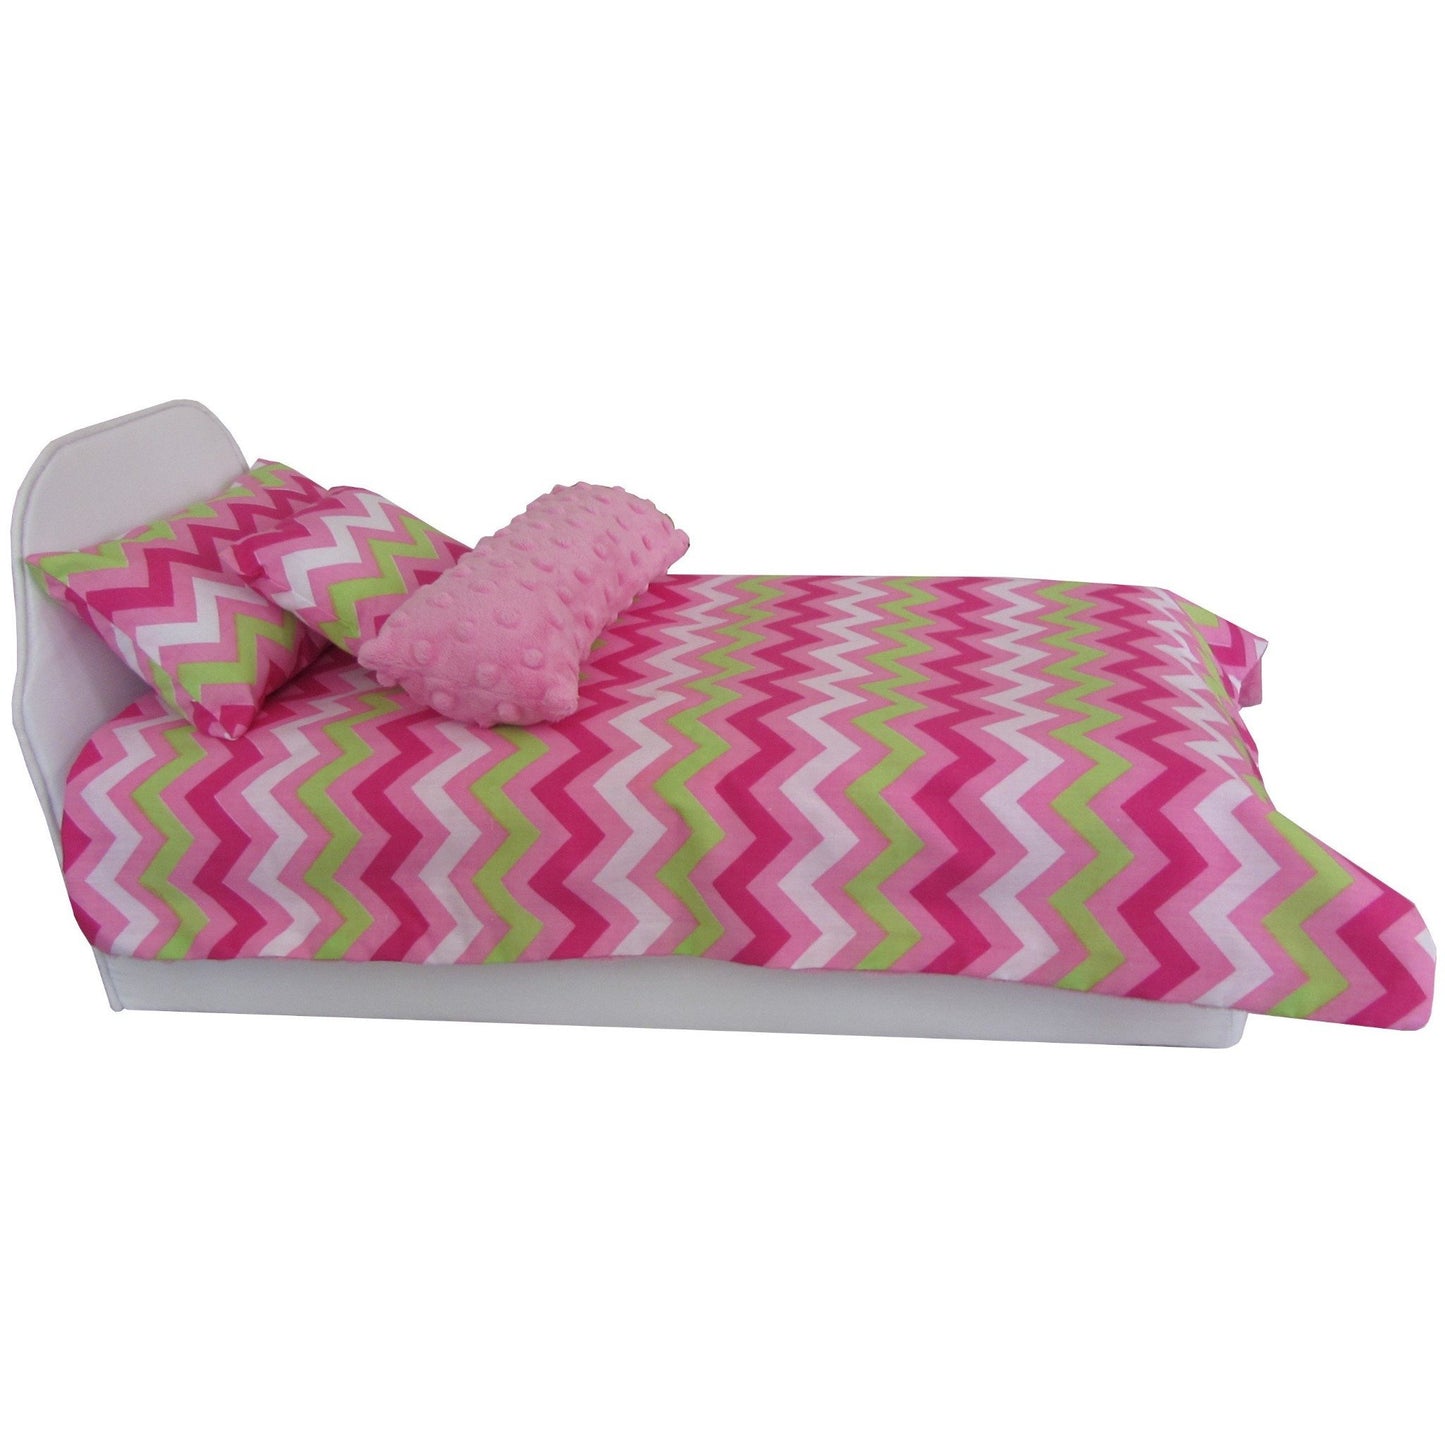 Pink Multi-color Chevron Doll Comforter for 18-inch dolls